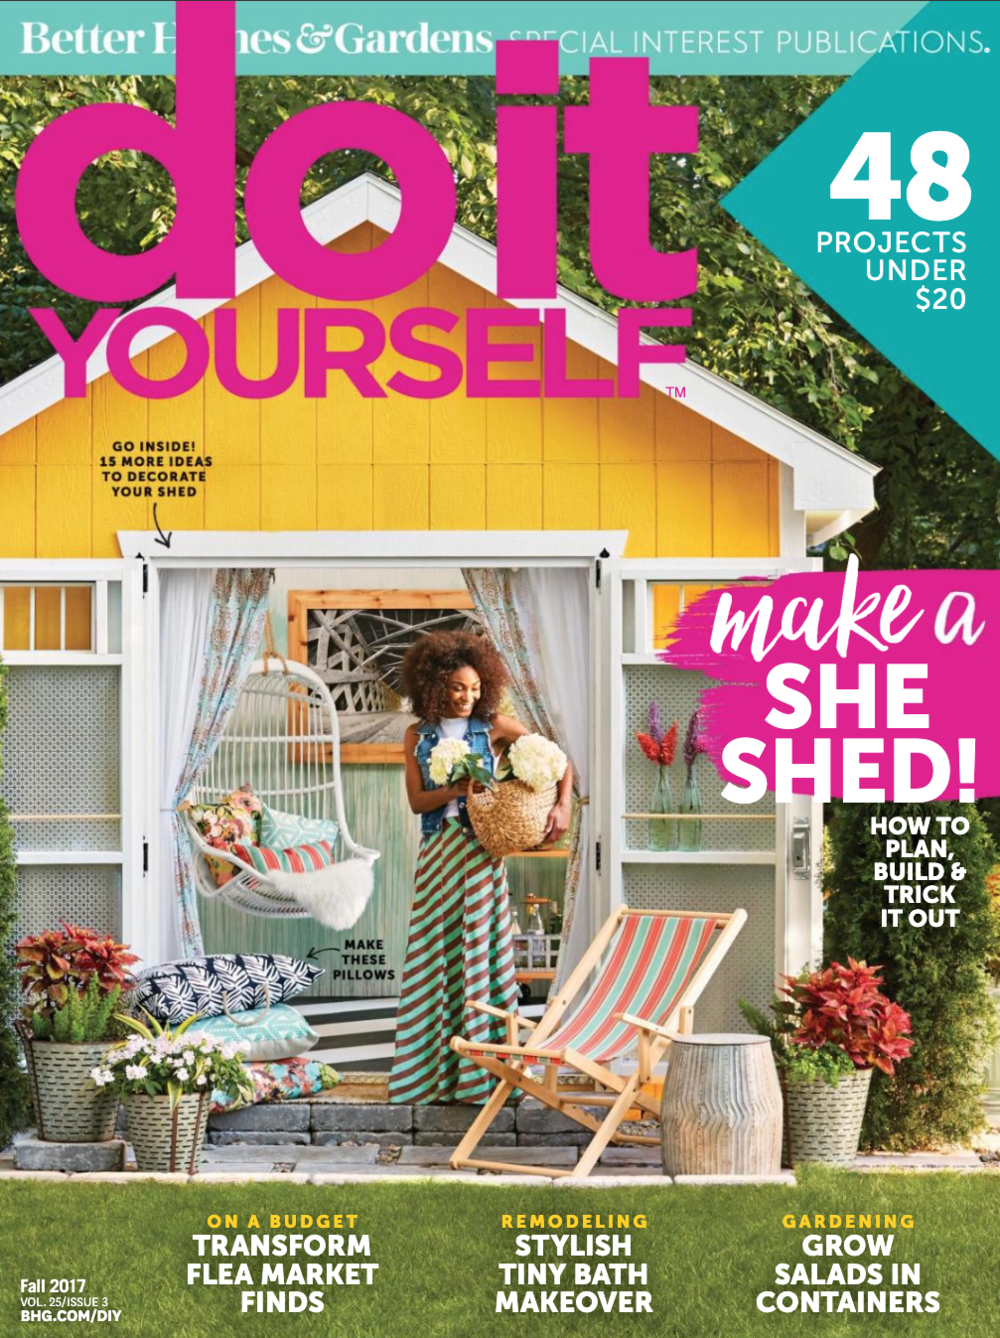 Better homes and gardens special interest publications do it yourself Kate Golding